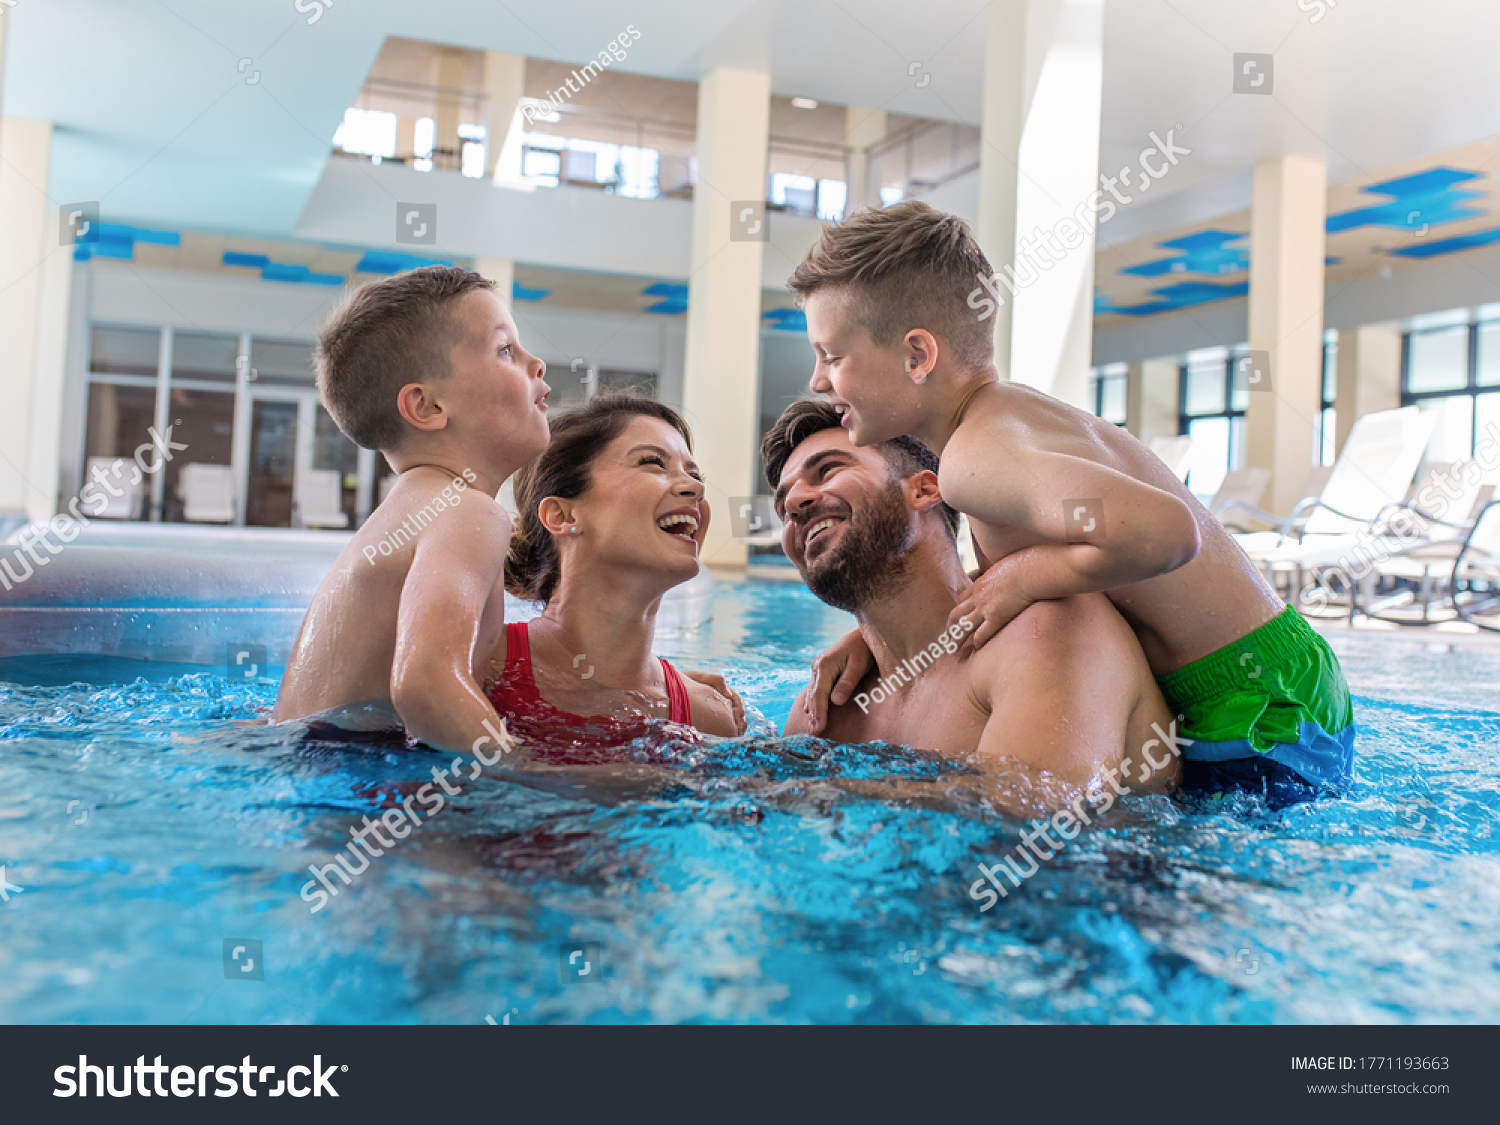 Smiling family of four having fun and relaxing in indoor swimming pool at hotel resort. #1771193663